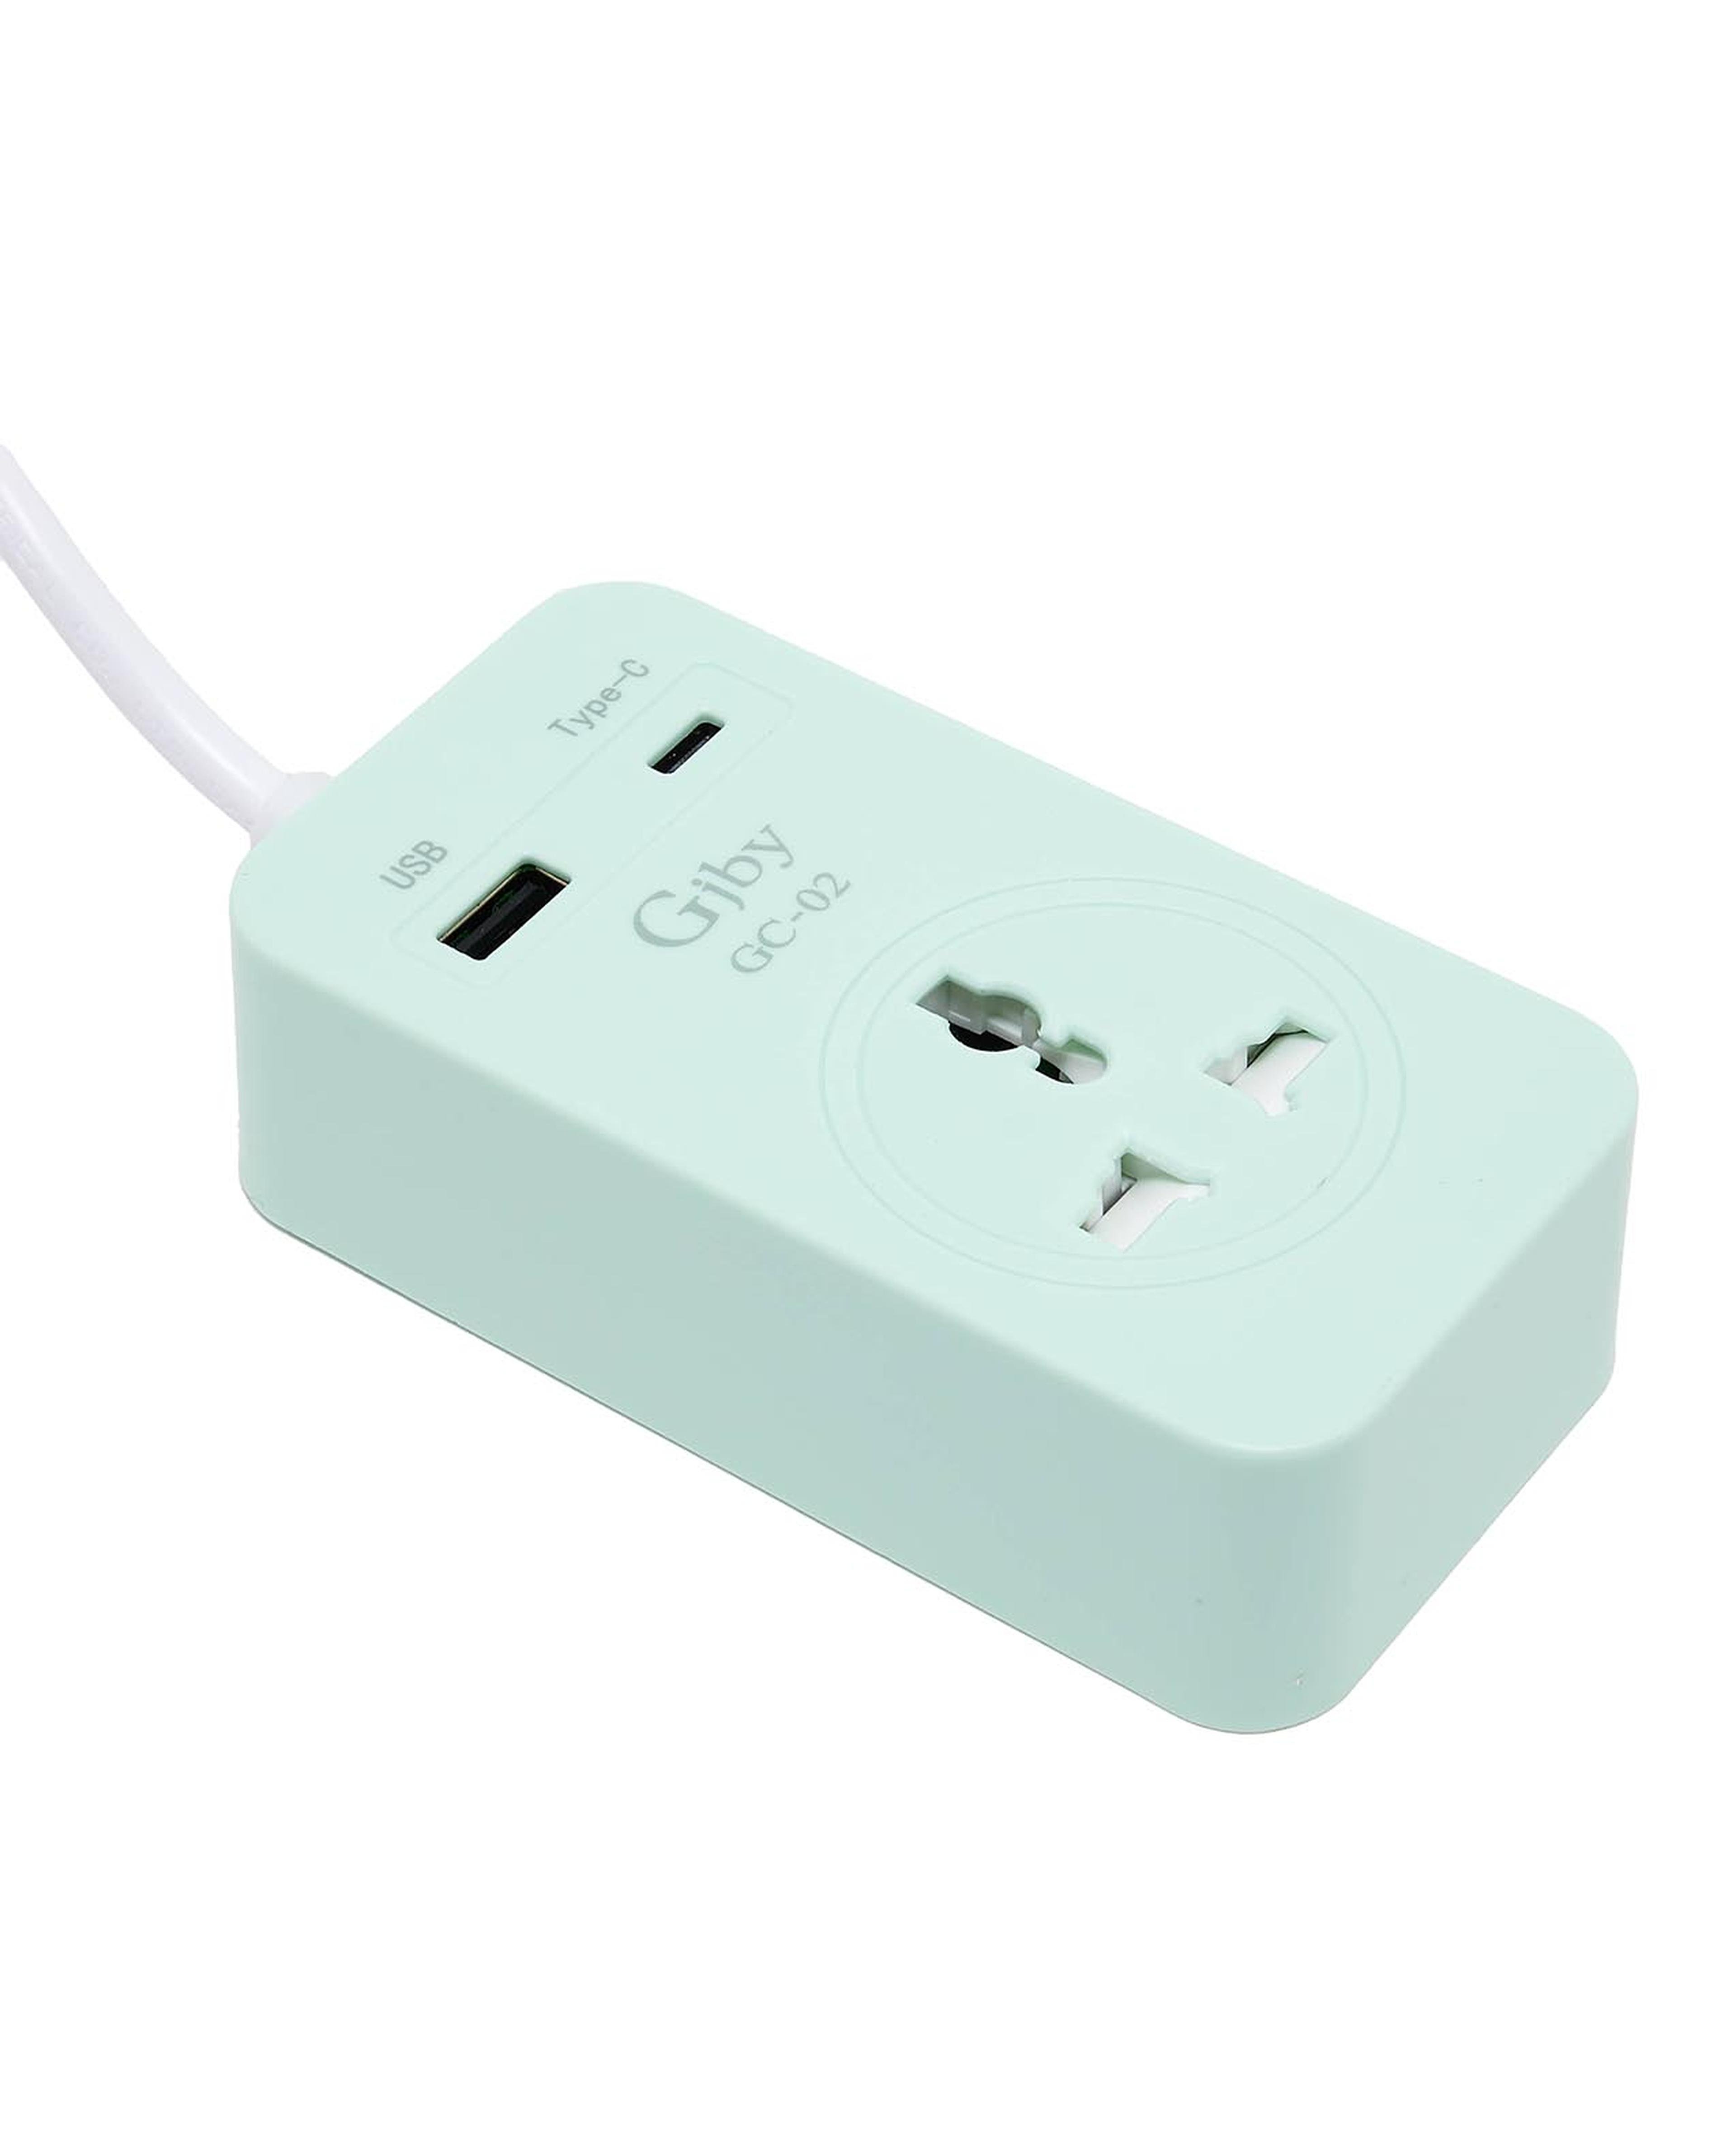 Smart Socket with USB & Type C Charging Ports